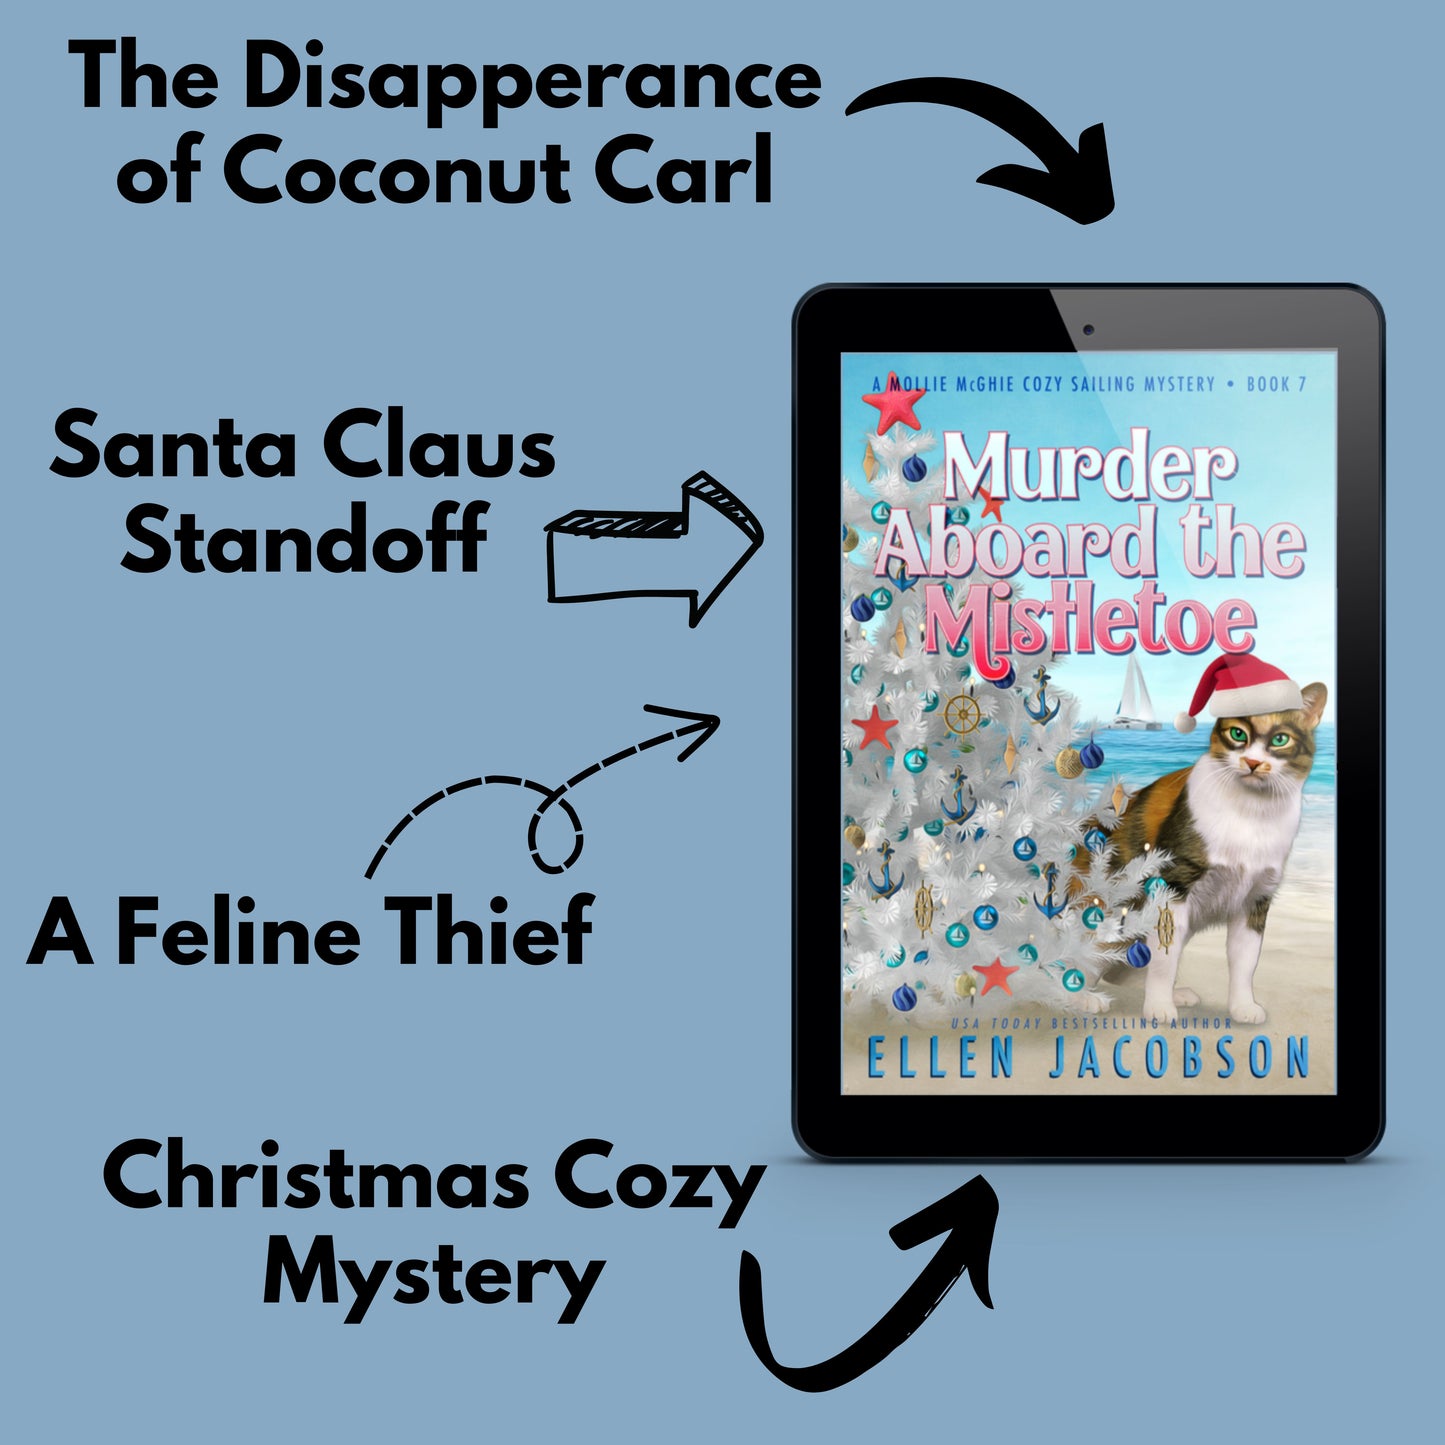 Murder aboard the Mistletoe (Mollie McGhie Cozy Mystery #7) ebook cover with text that says the disapperance of Coconut Carl, Santa Claus standoff, a feline thief, and a Christmas cozy mystery 